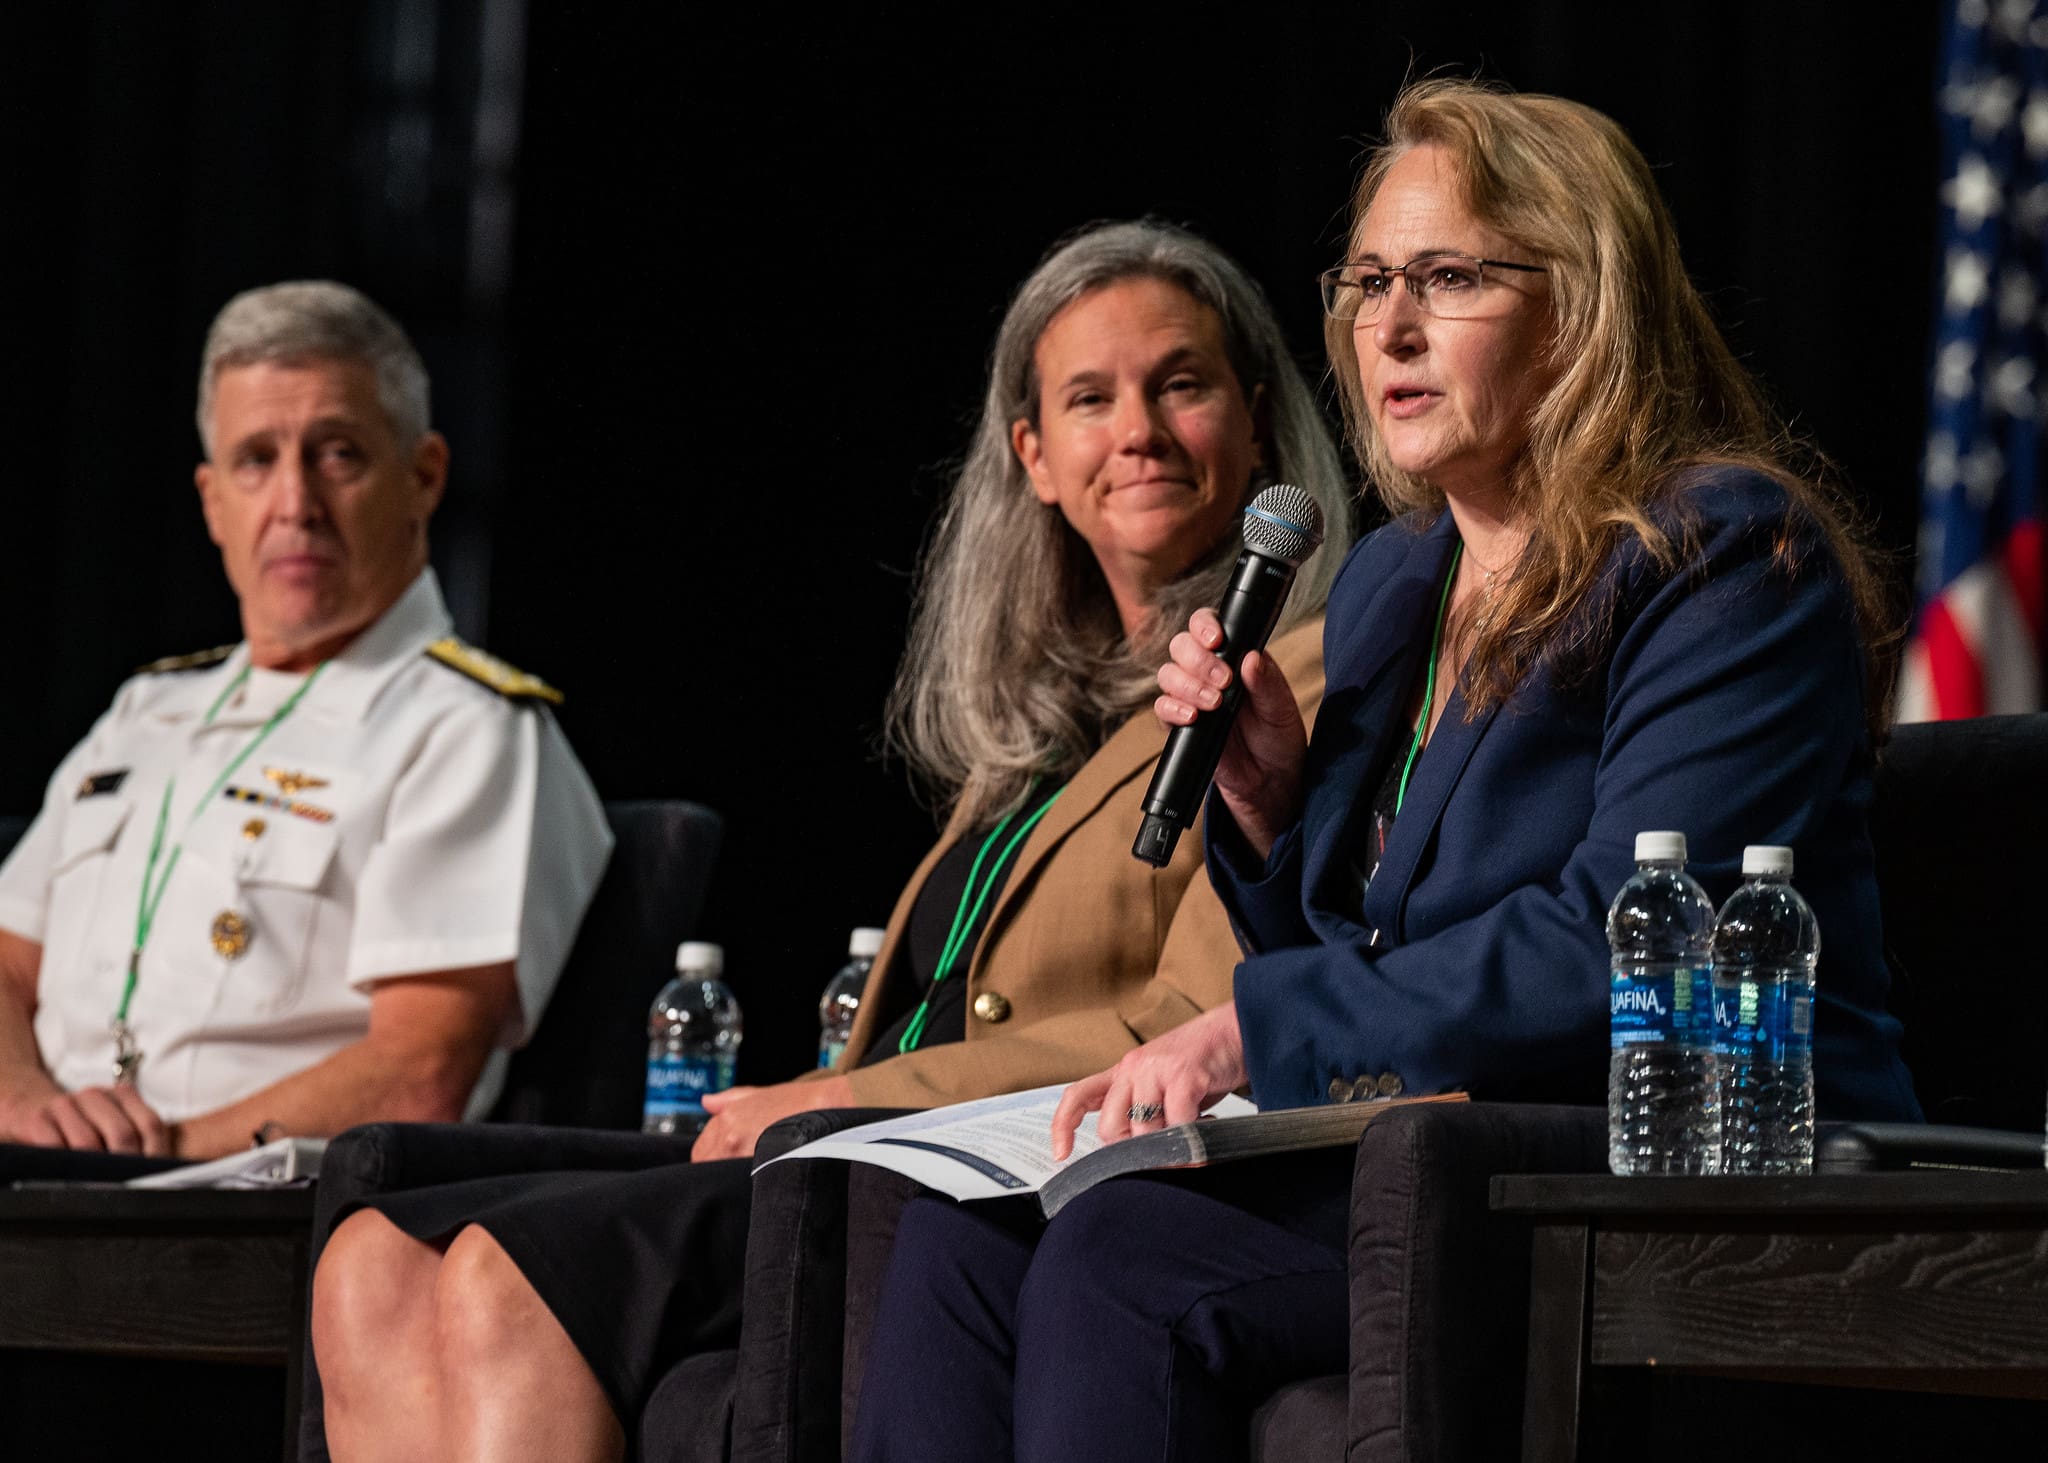 Dr. Celeste Gventer, right, the president of Defense Security Cooperation University, speaks during the Department of Defense National Guard State Partnership Program (SPP) 30th Anniversary Conference at National Harbor, Md., July 18. The SPP pairs Guard elements with partner nations worldwide, building enduring relationships through mutual training exchanges that strengthen security, improve interoperability and enhance the readiness of U.S. and partner forces. Established in July 1993, the program began with less than a dozen partnerships and has grown to include 100 countries representing more than 50 percent of the world’s nations. Air National Guard photo by Tech. Sgt. Sarah M. McClanahan